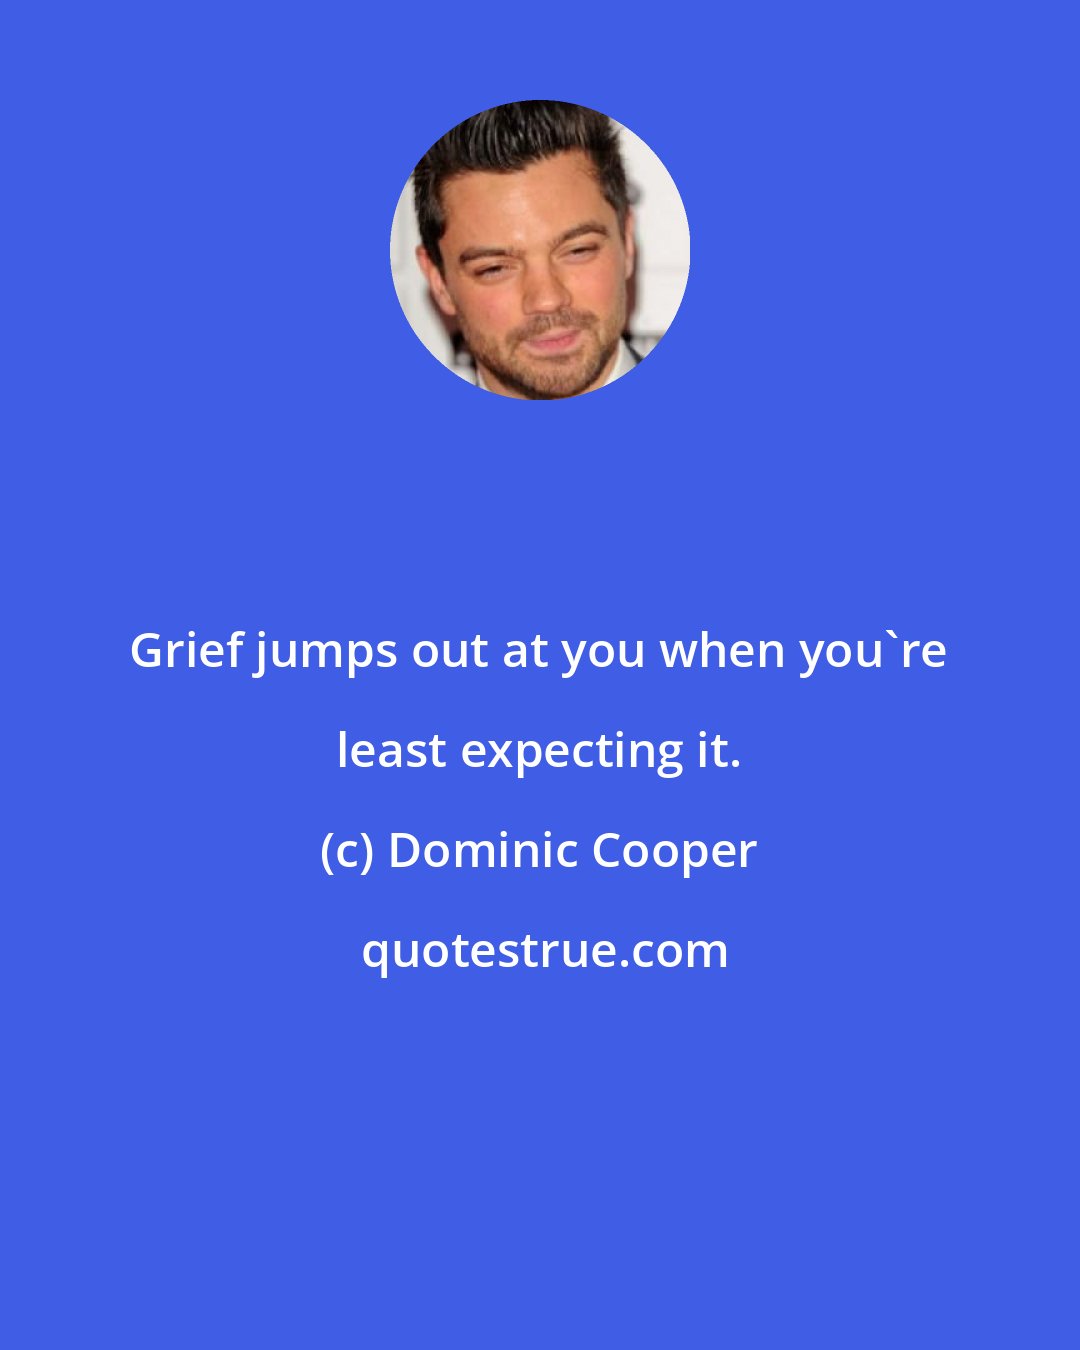 Dominic Cooper: Grief jumps out at you when you're least expecting it.